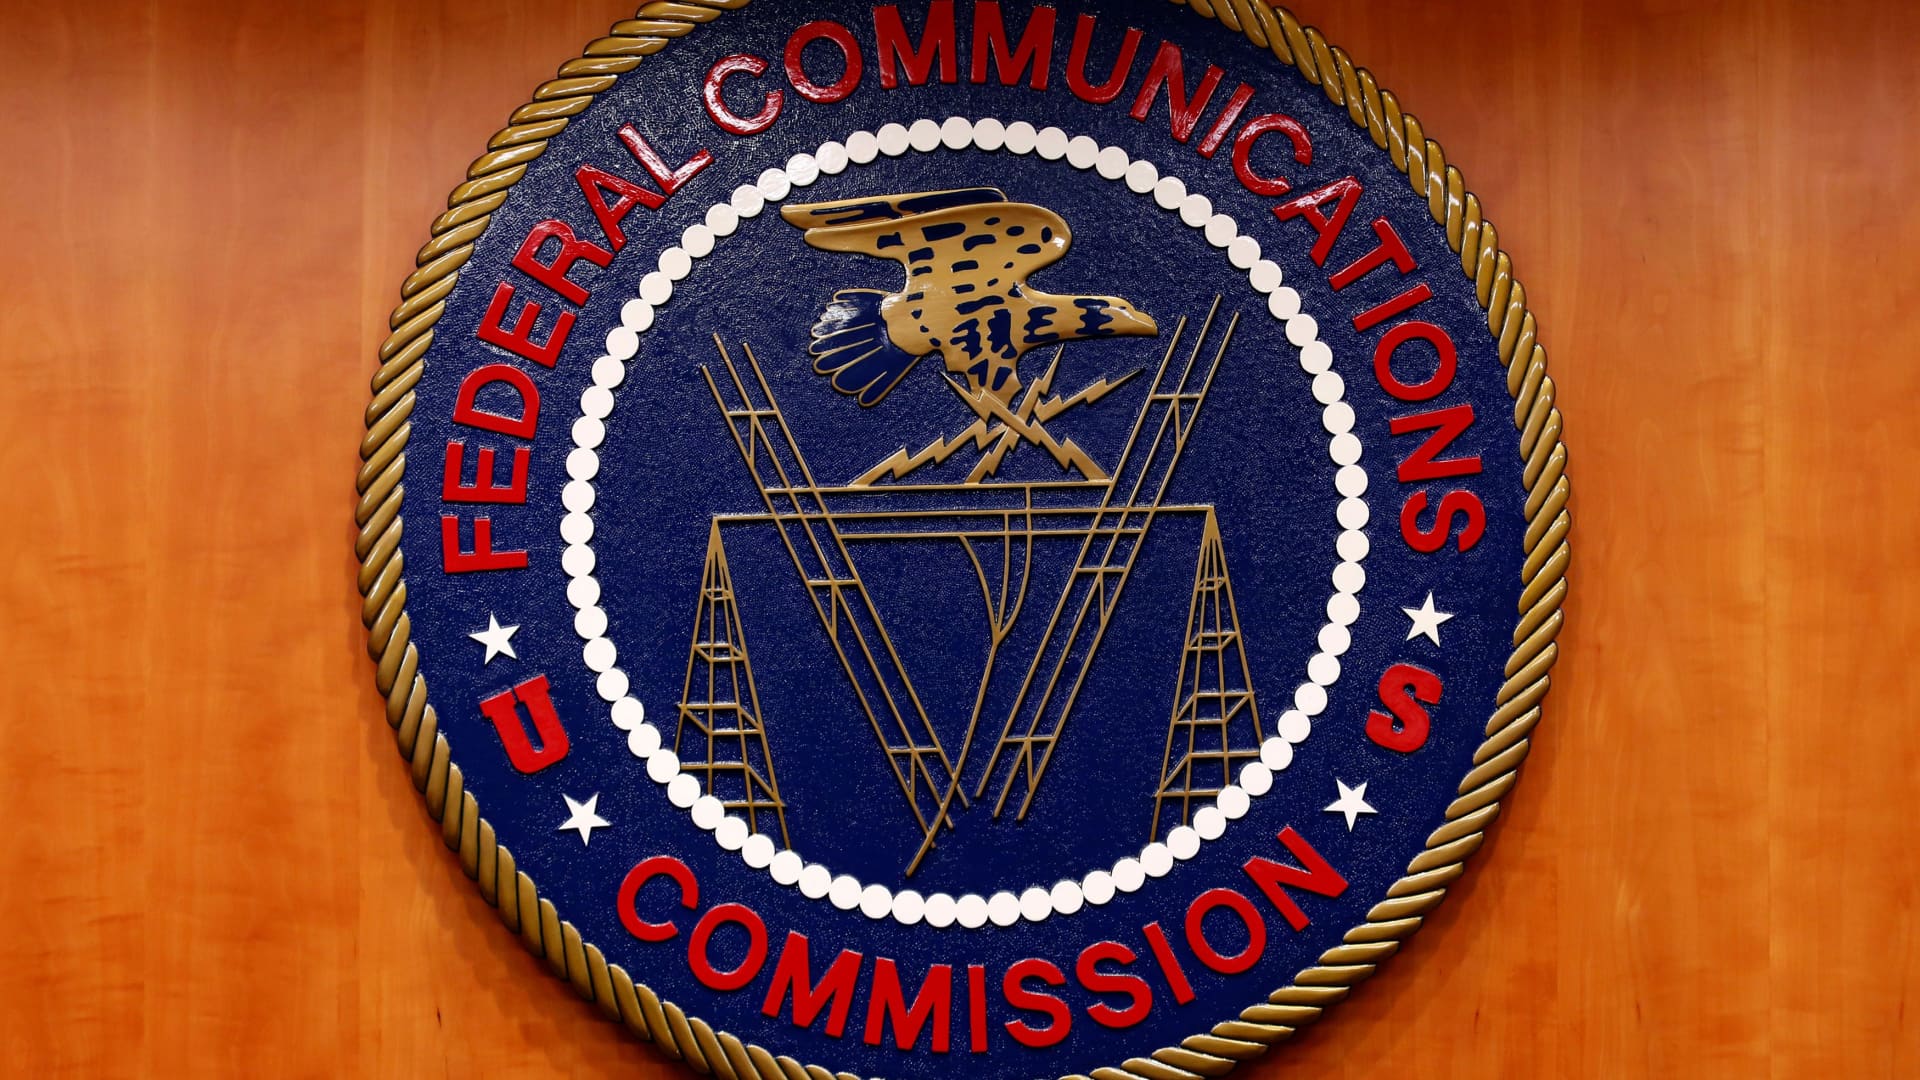 The Federal Communications Commission (FCC) logo is seen before the FCC Net Neutrality hearing in Washington February 26, 2015.